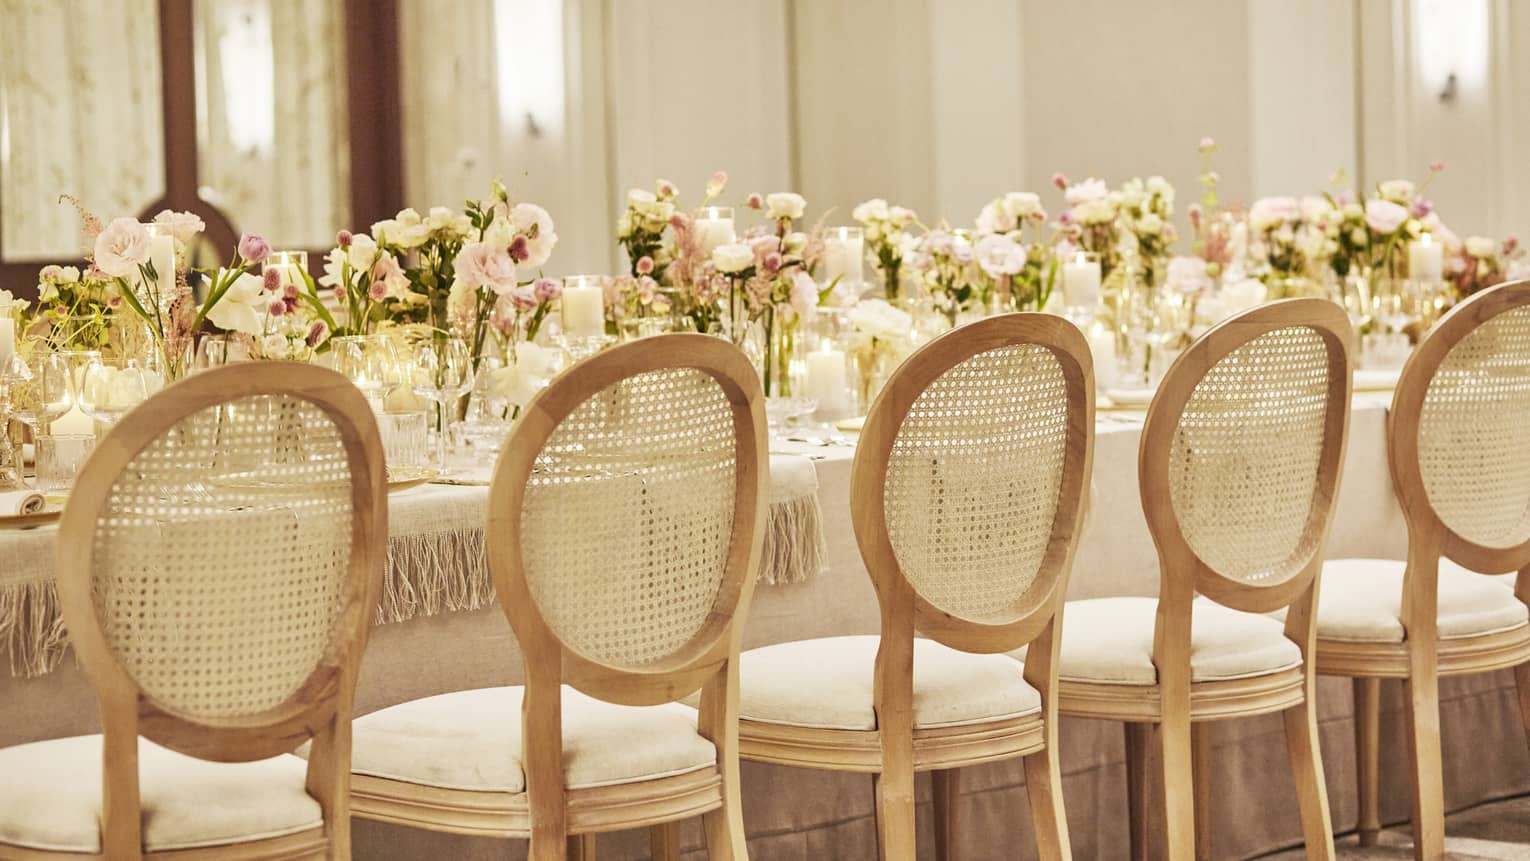 Elegantly set dining table with floral arrangements down centre and lined with chairs